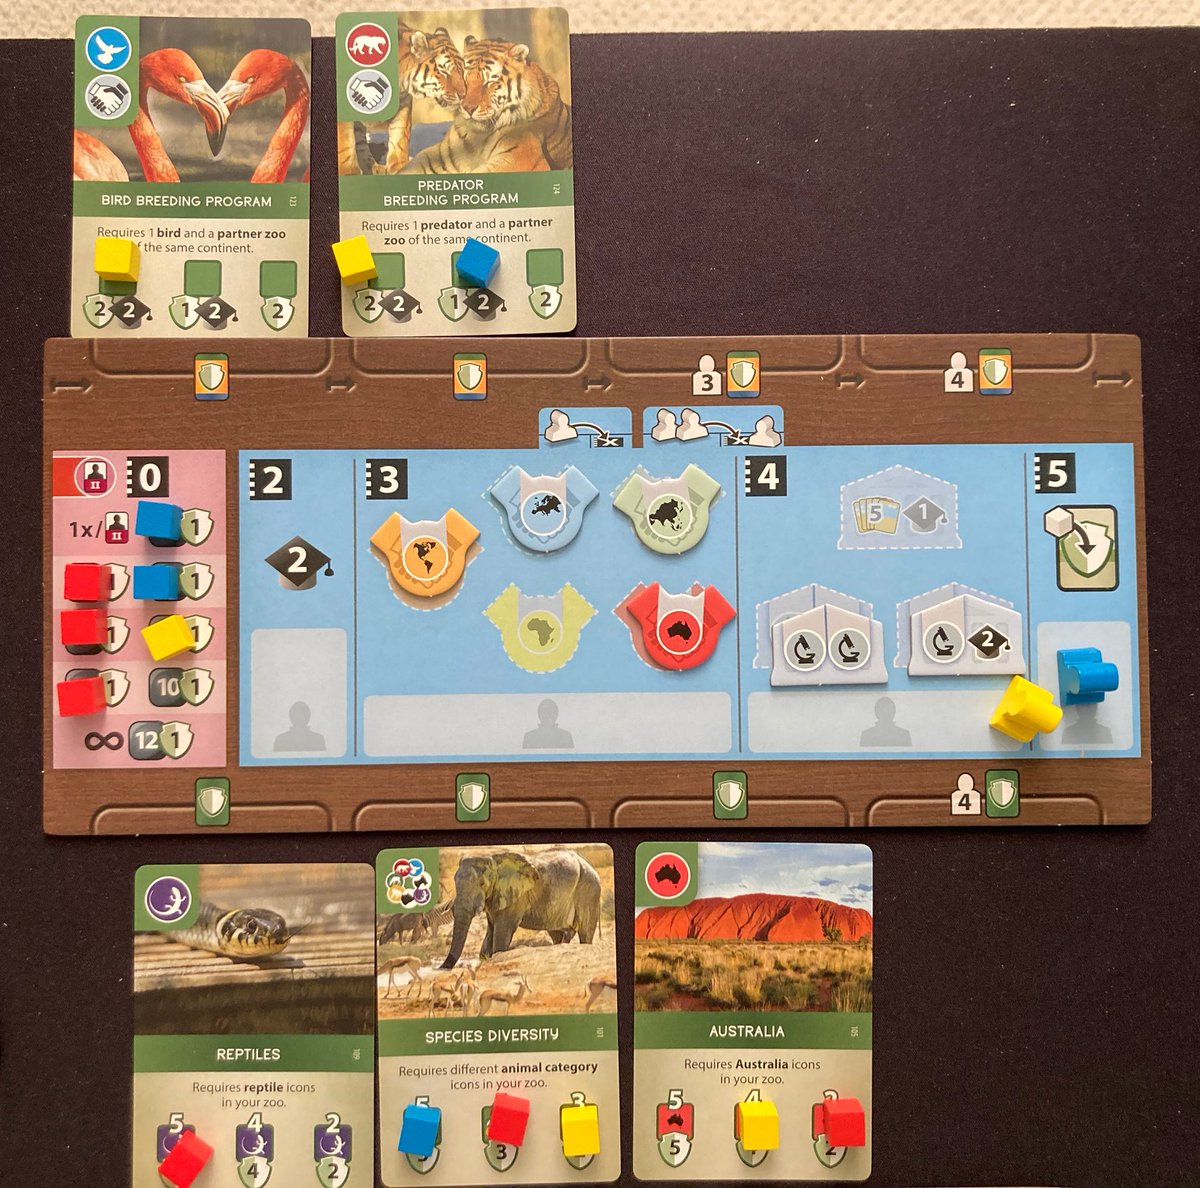 QUARANTINE CHRONICLES: GAMING EDITION First play of Ark Nova, a heavy-ish euro-style zoo builder. It’s a Frankenstein’s monster composed of mechanics we love in other games. But it didn’t gel for us. Need a few more plays before final judgement.